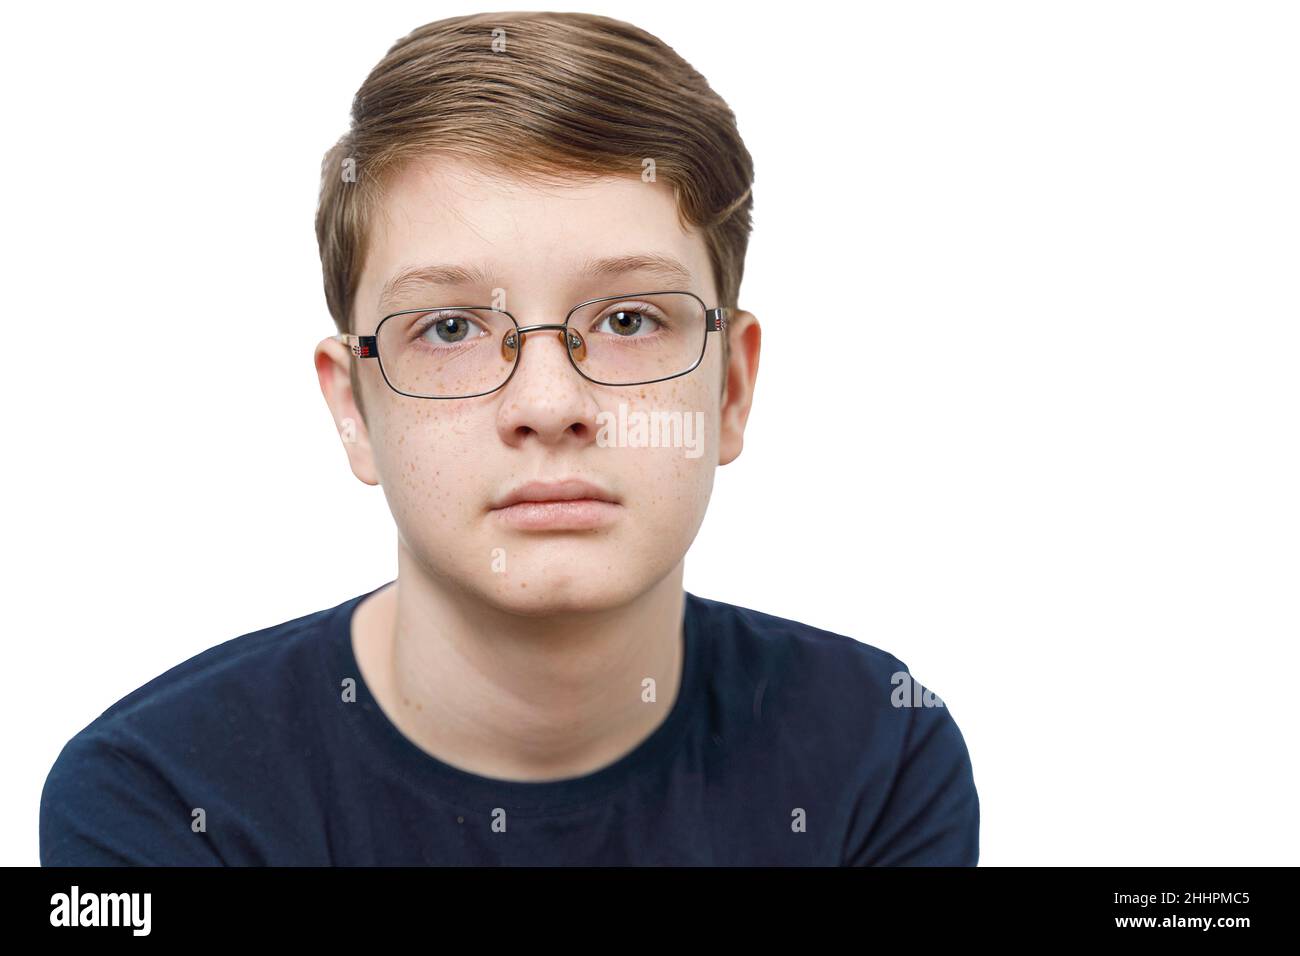 Teenager boy with freckles on a face with classic glasses, isolated in white background. Healthy people concept. Stock Photo